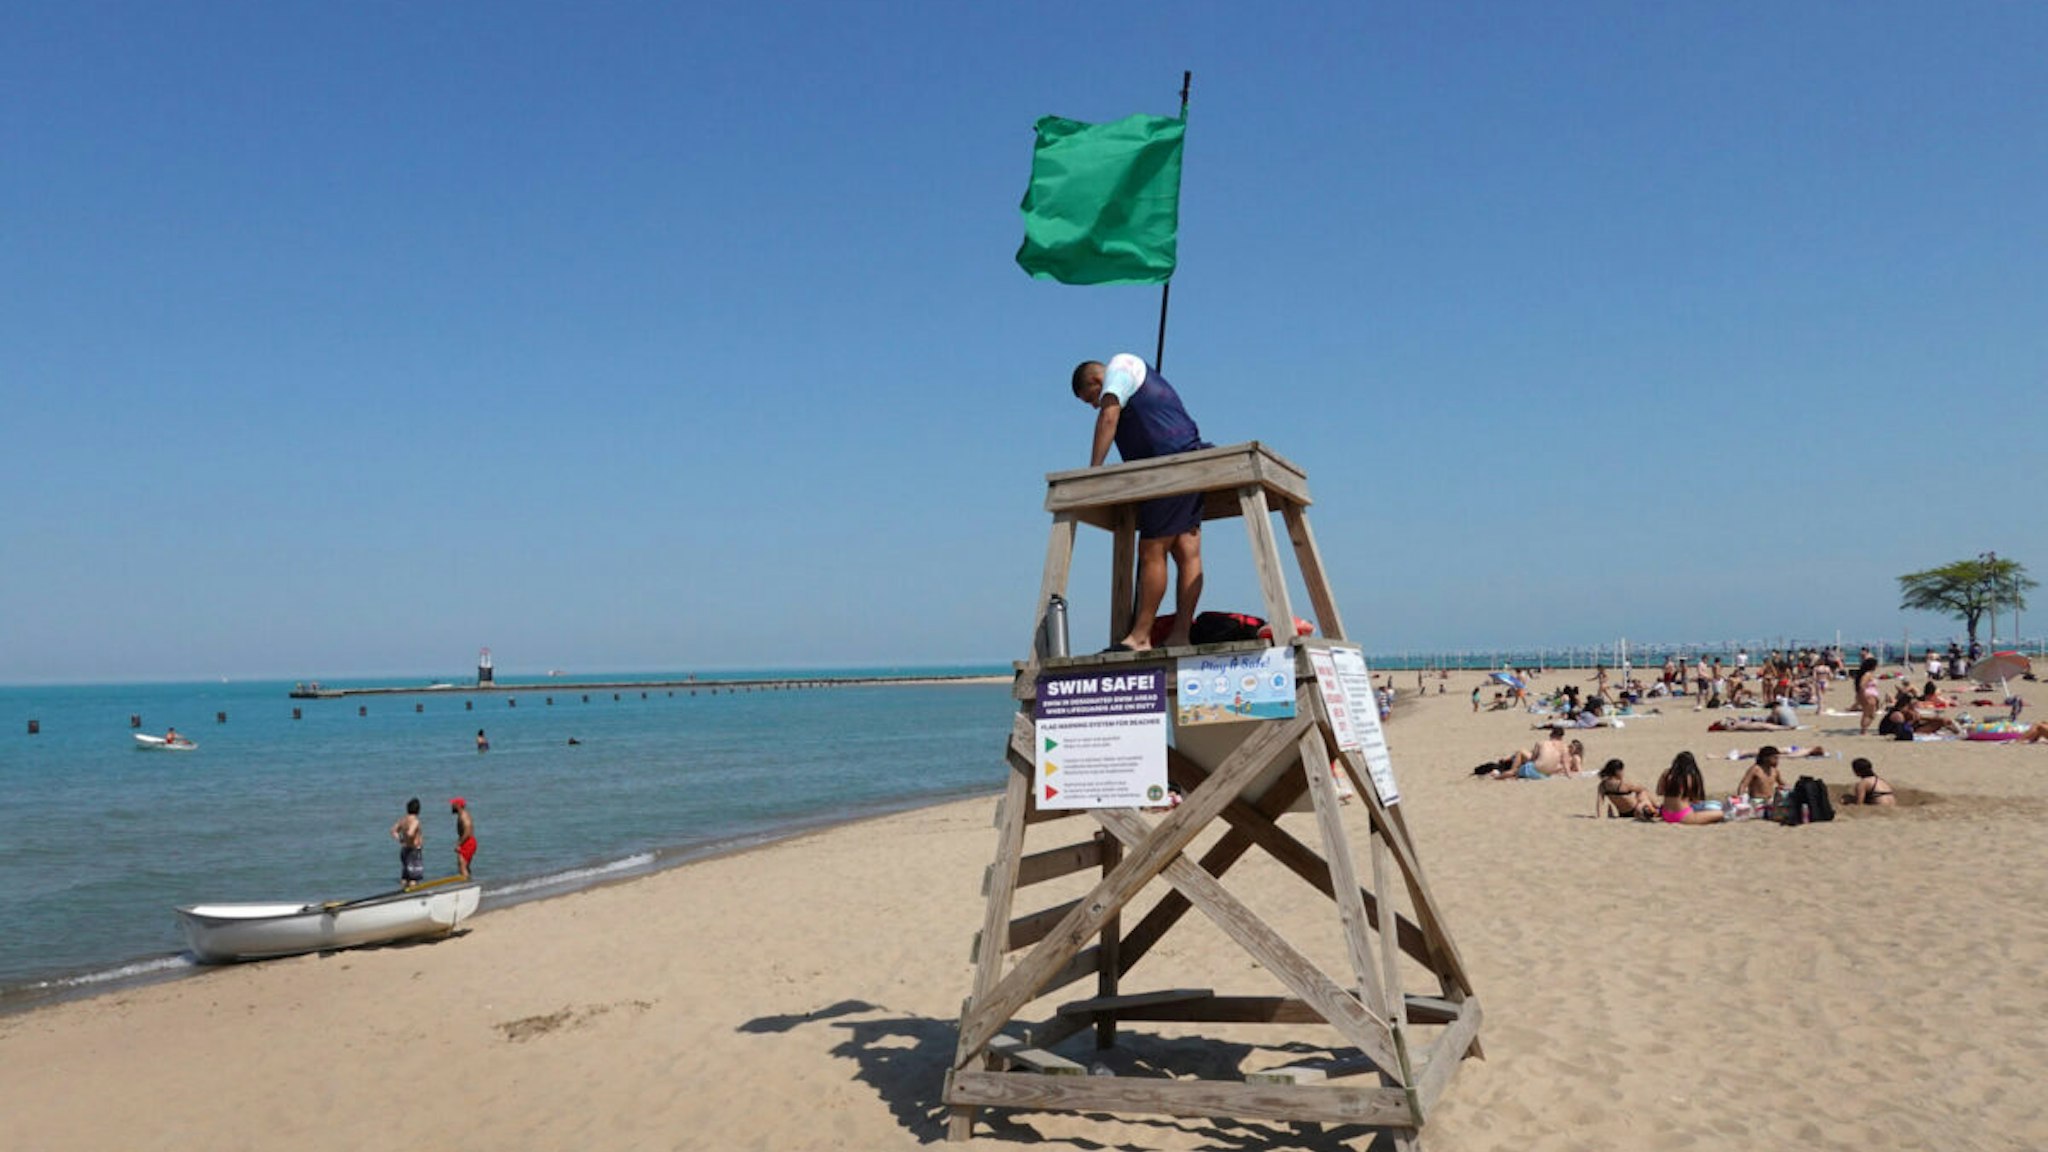 CHICAGO, ILLINOIS - JUNE 03: A lifeguard keeps watch over beachgoers at North Avenue Beach on June 03, 2021 in Chicago, Illinois. Nationwide, municipalities have had difficulty filling lifeguard jobs. Part of the problem has been attributed to the cancelation of lifeguard training programs in 2020 due to the COVID-19 pandemic.